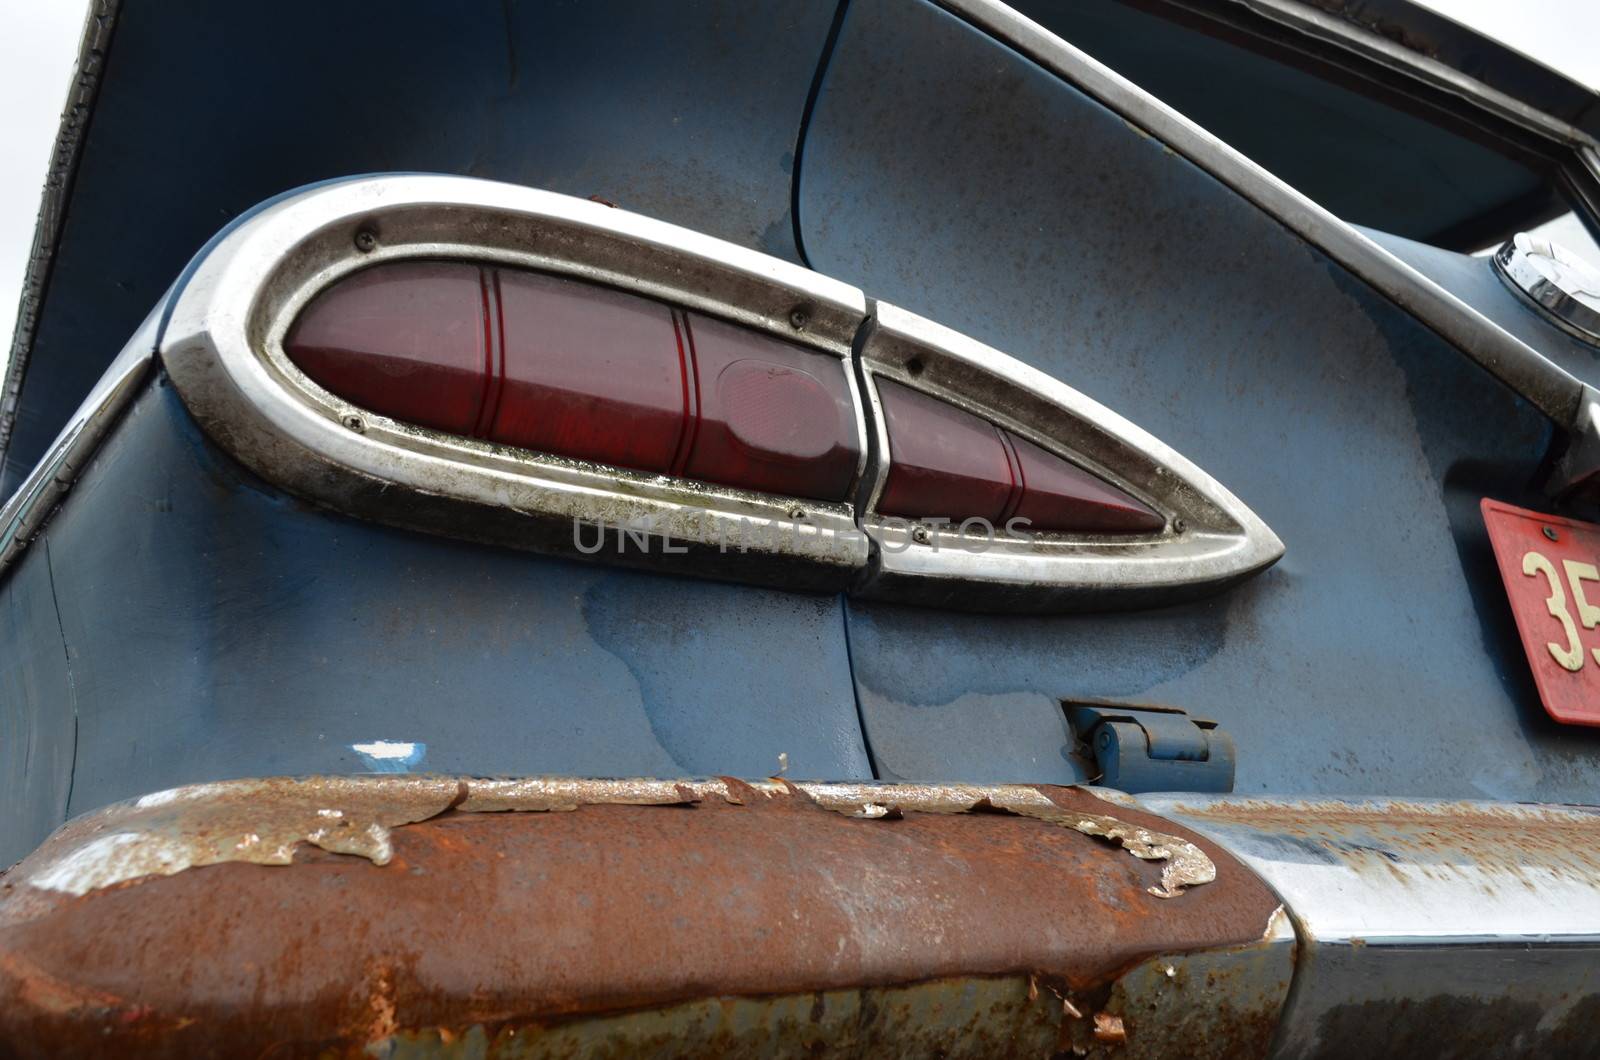 Rust on old classic car. by bunsview